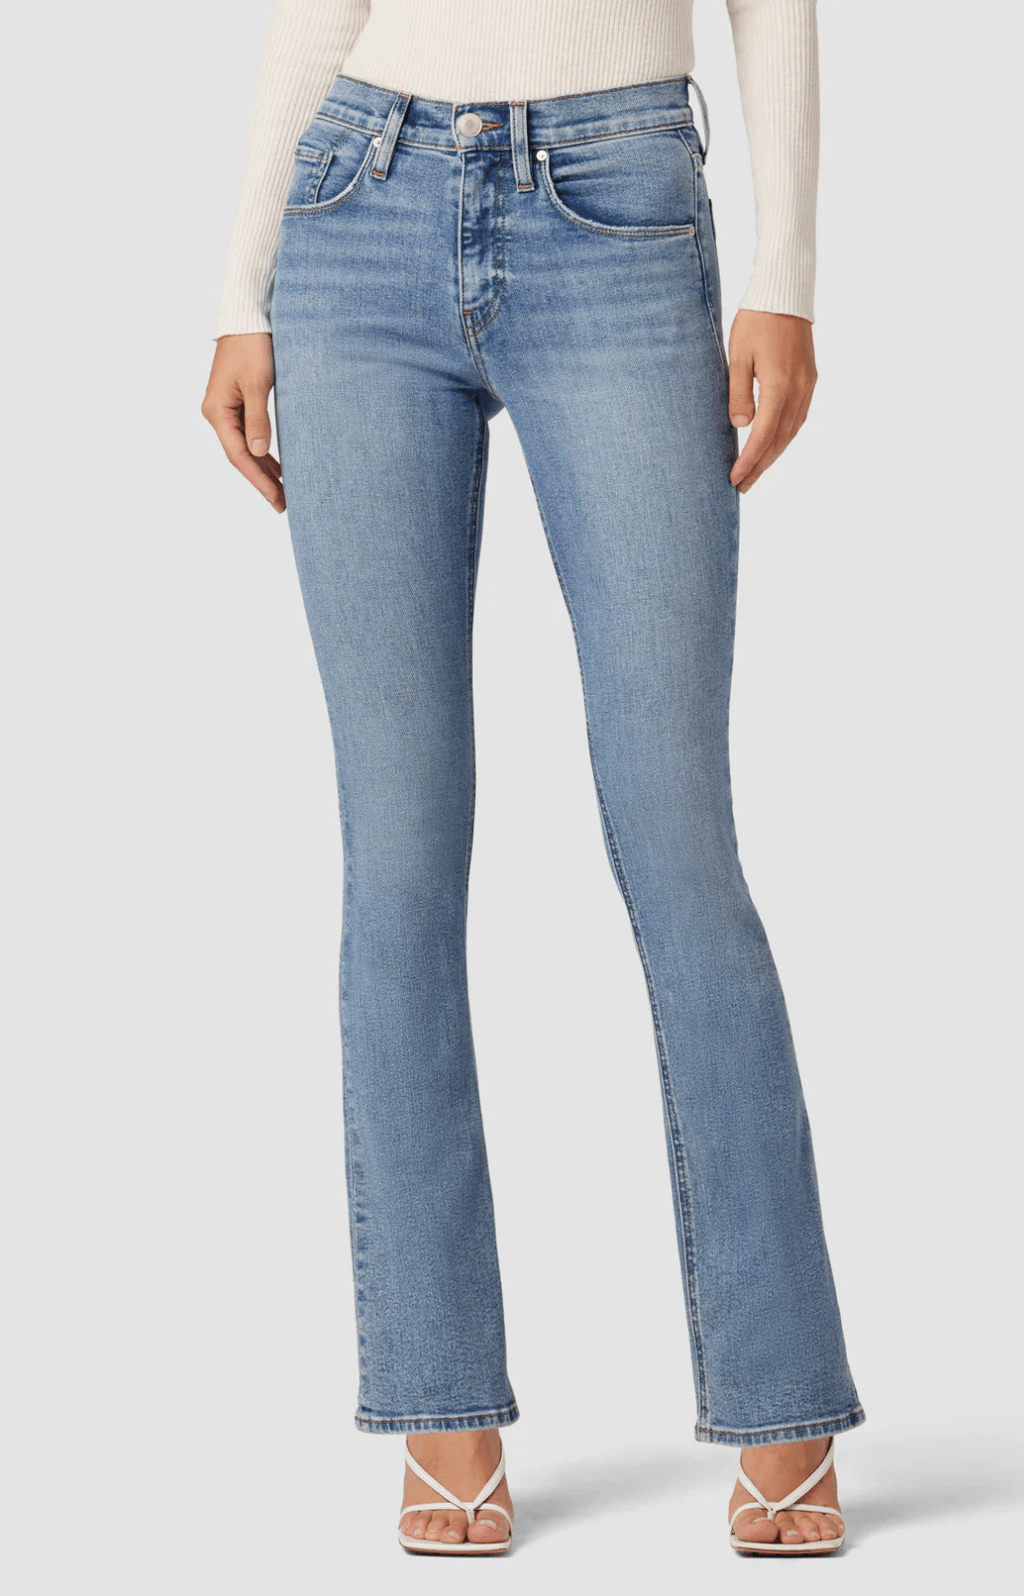 Hudson Jeans Barbara High Rise Baby Bootcut Jeans